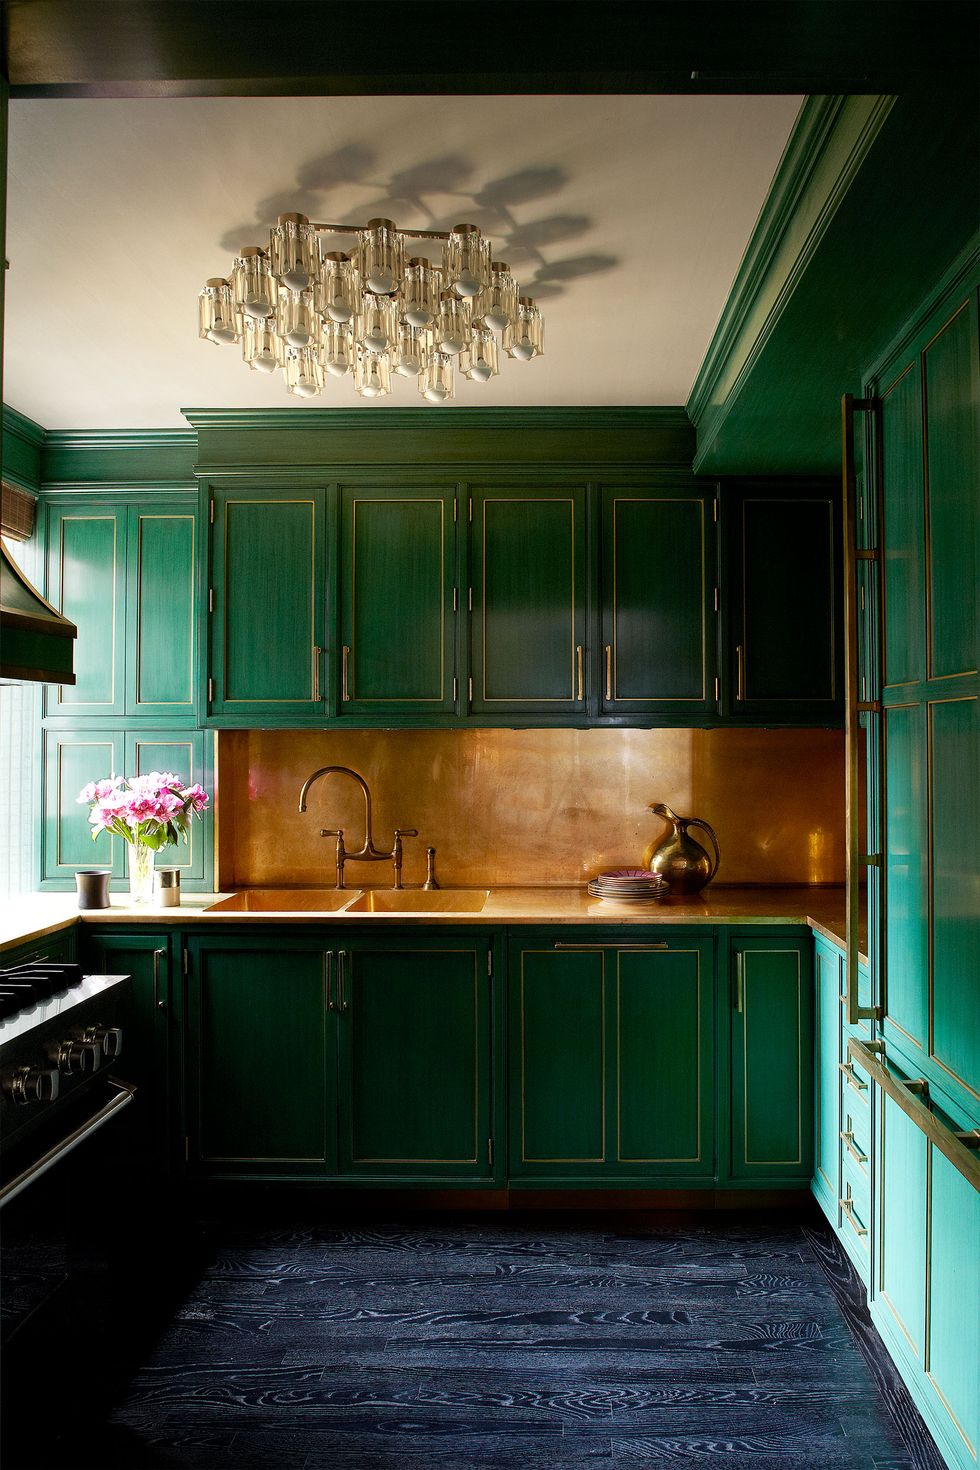 10 Beautiful Kitchens with Green Walls  Green kitchen walls, Green kitchen  decor, Green kitchen cabinets